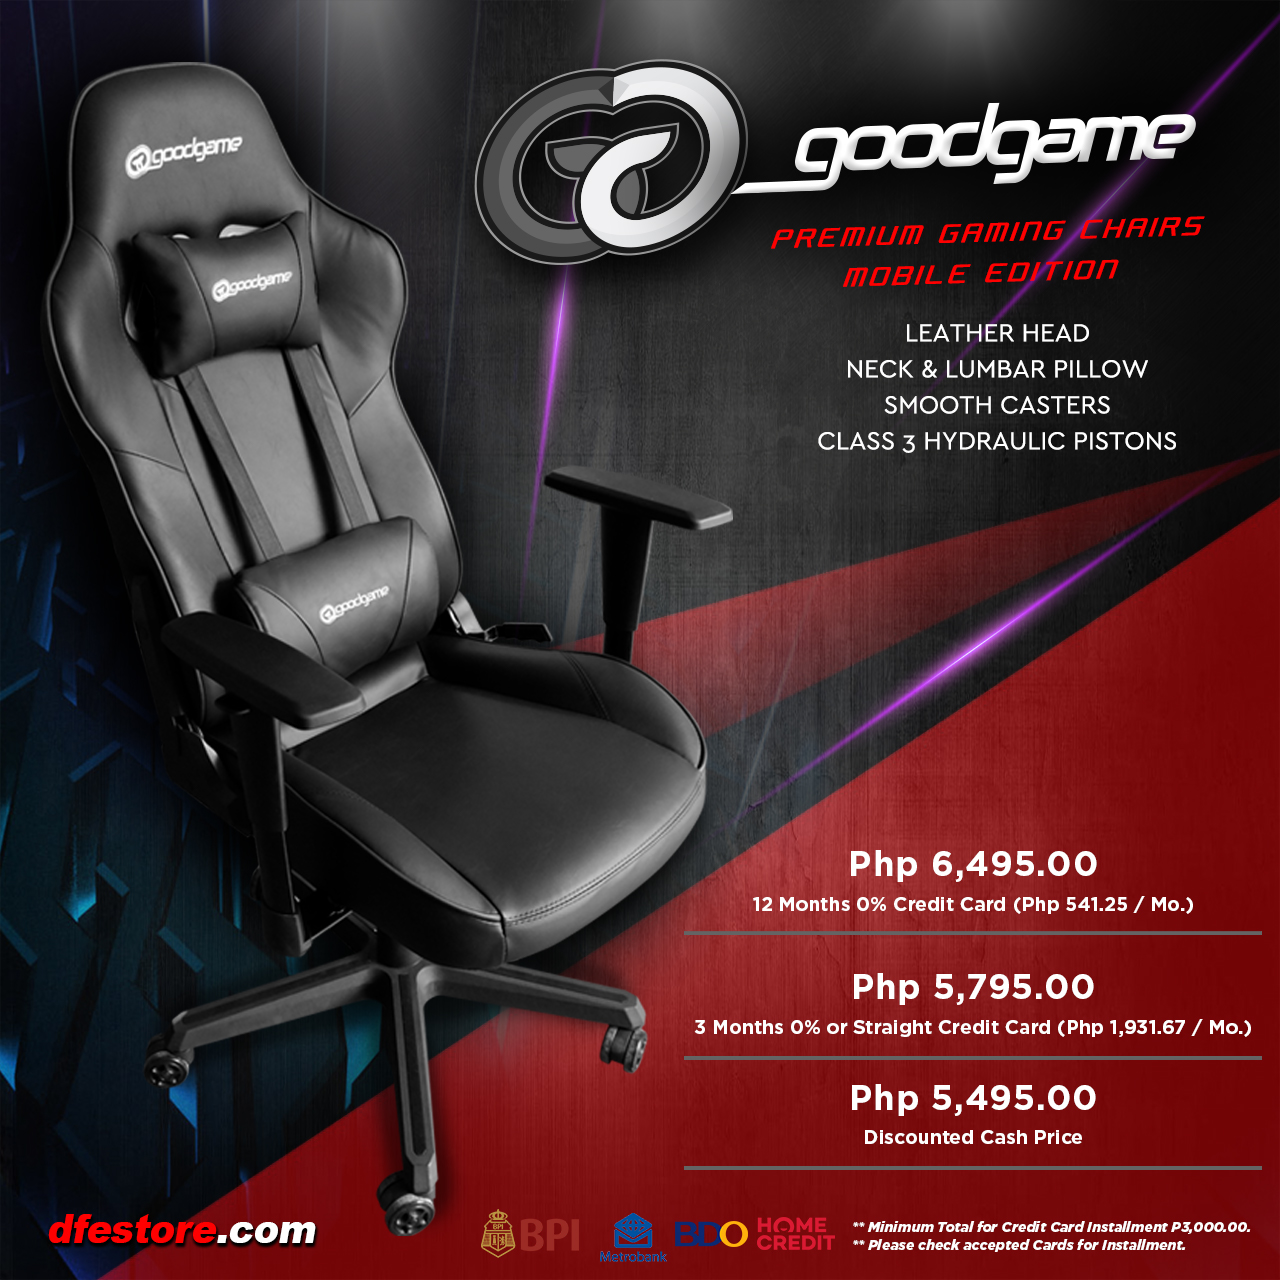 Gg Premium Gaming Chairs Mobile Edition Leather Head Neck